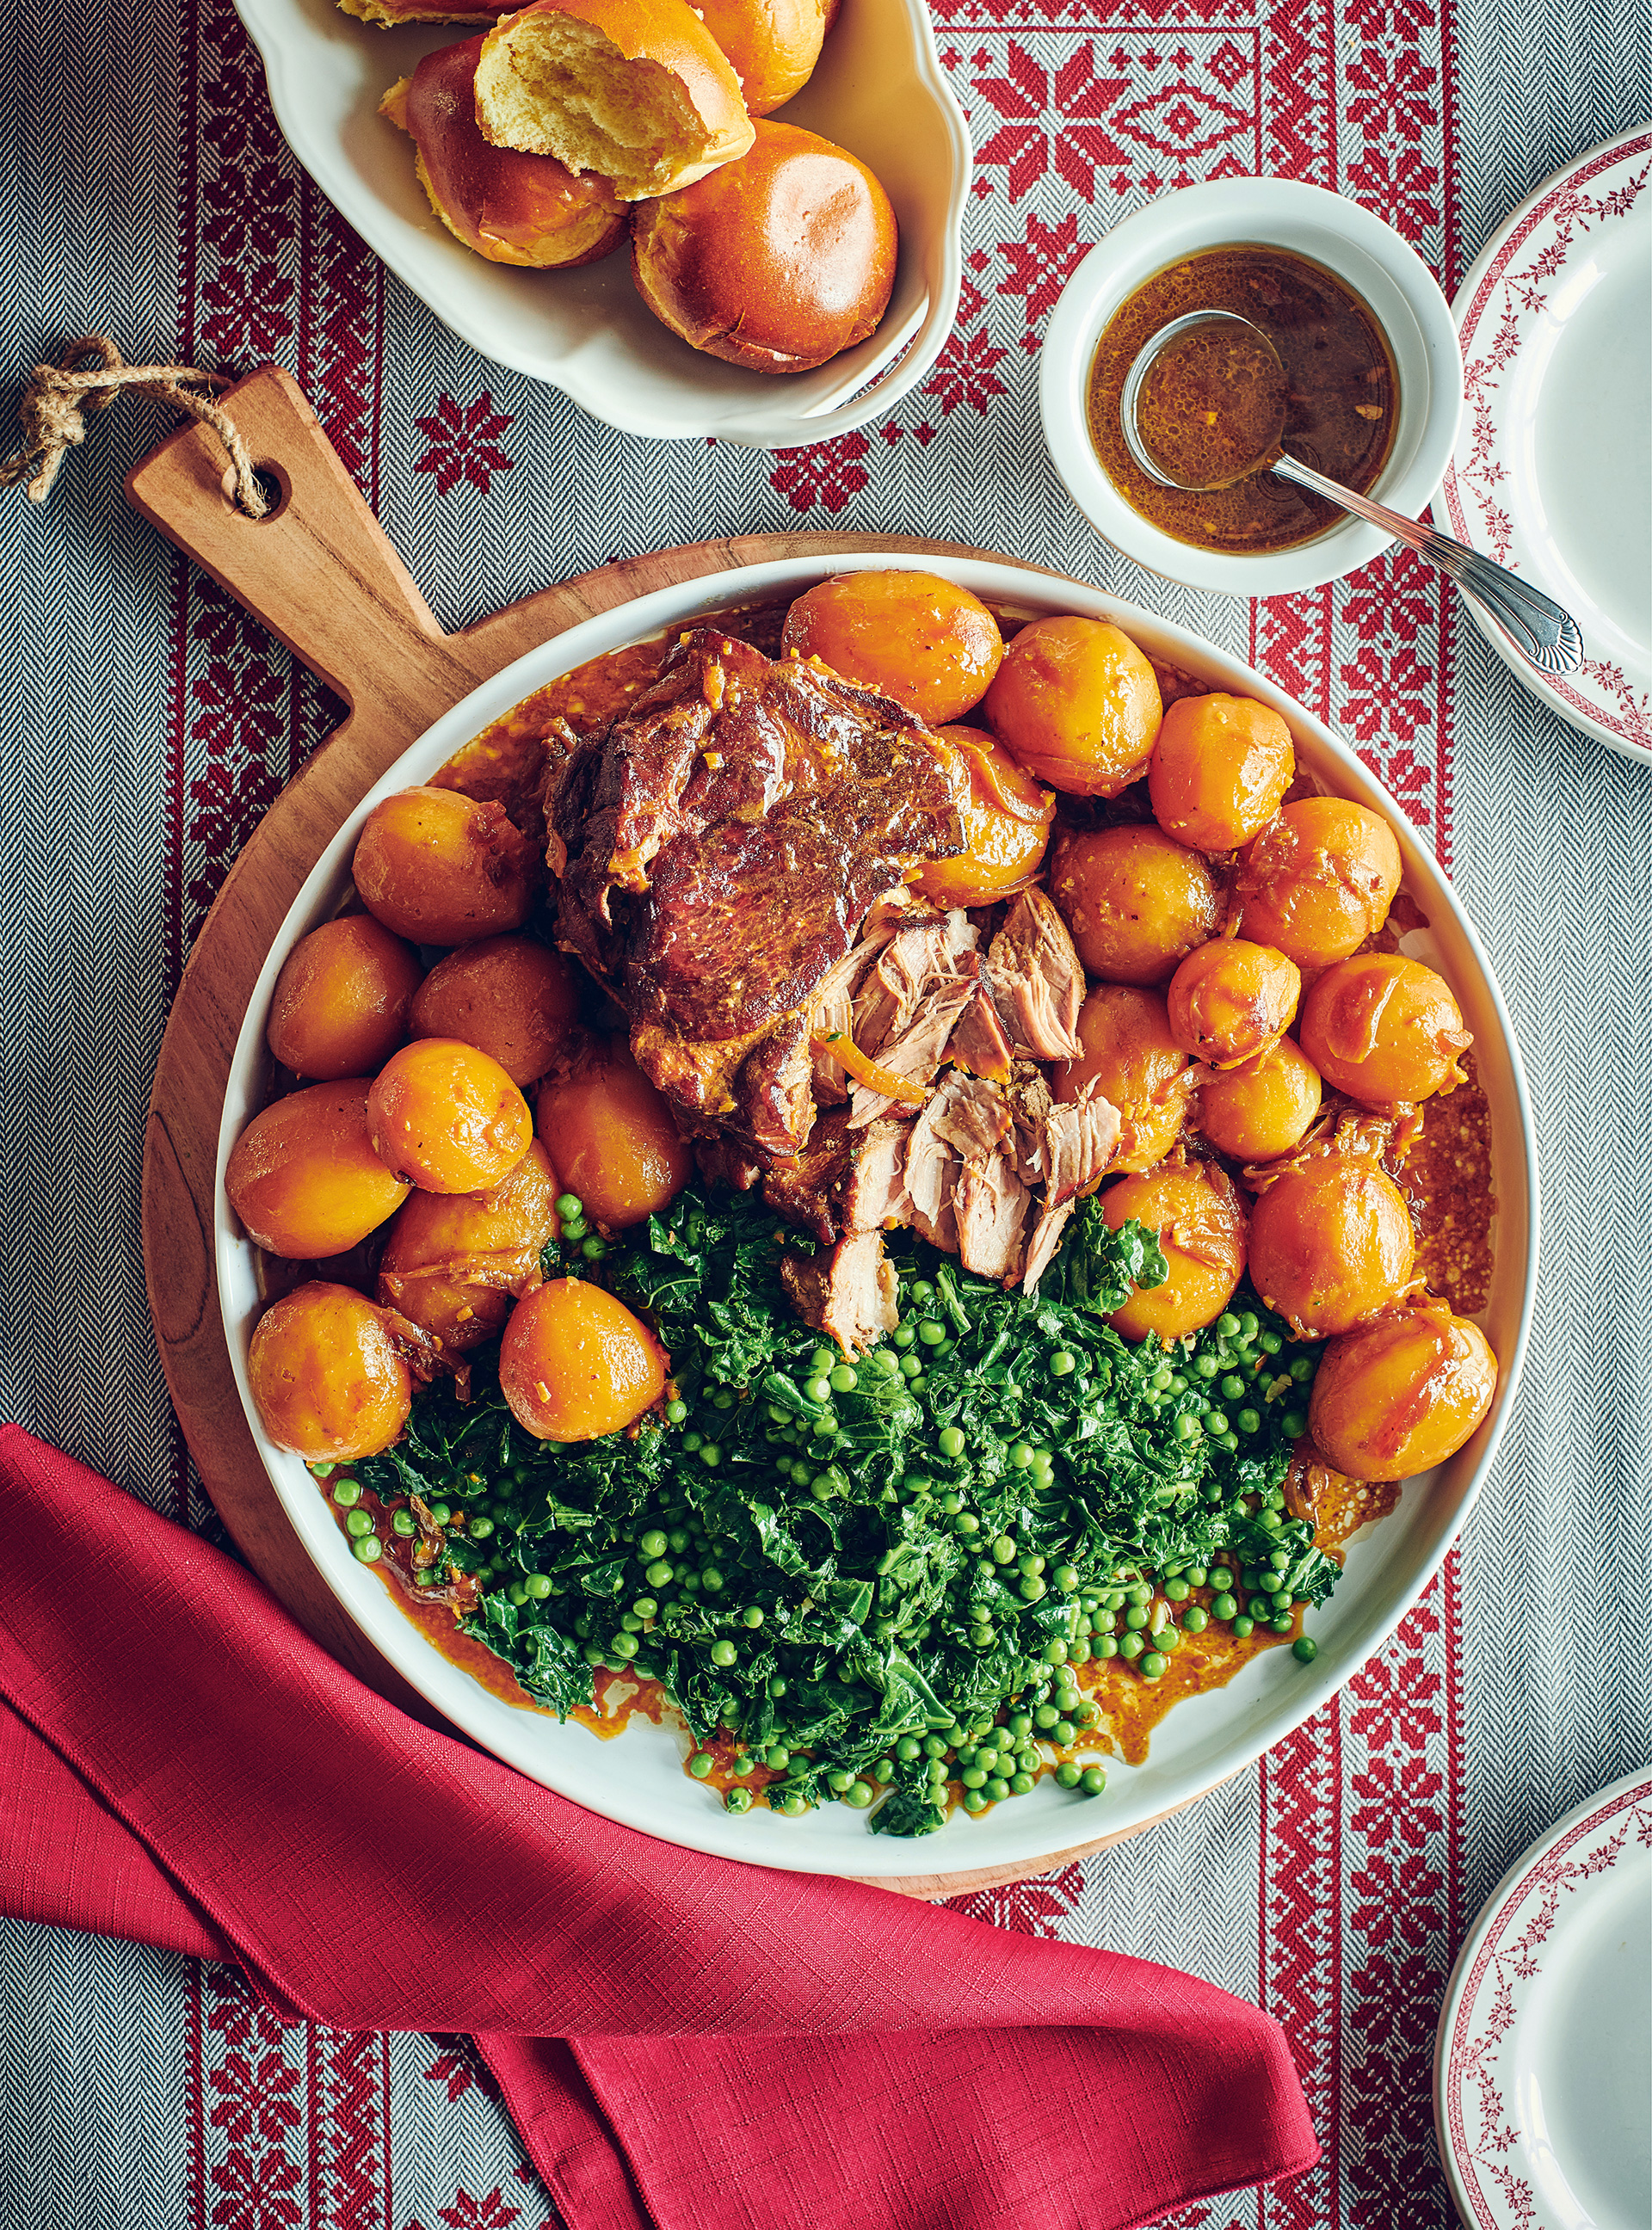 Ginger-Braised Pork with Yellow Potatoes